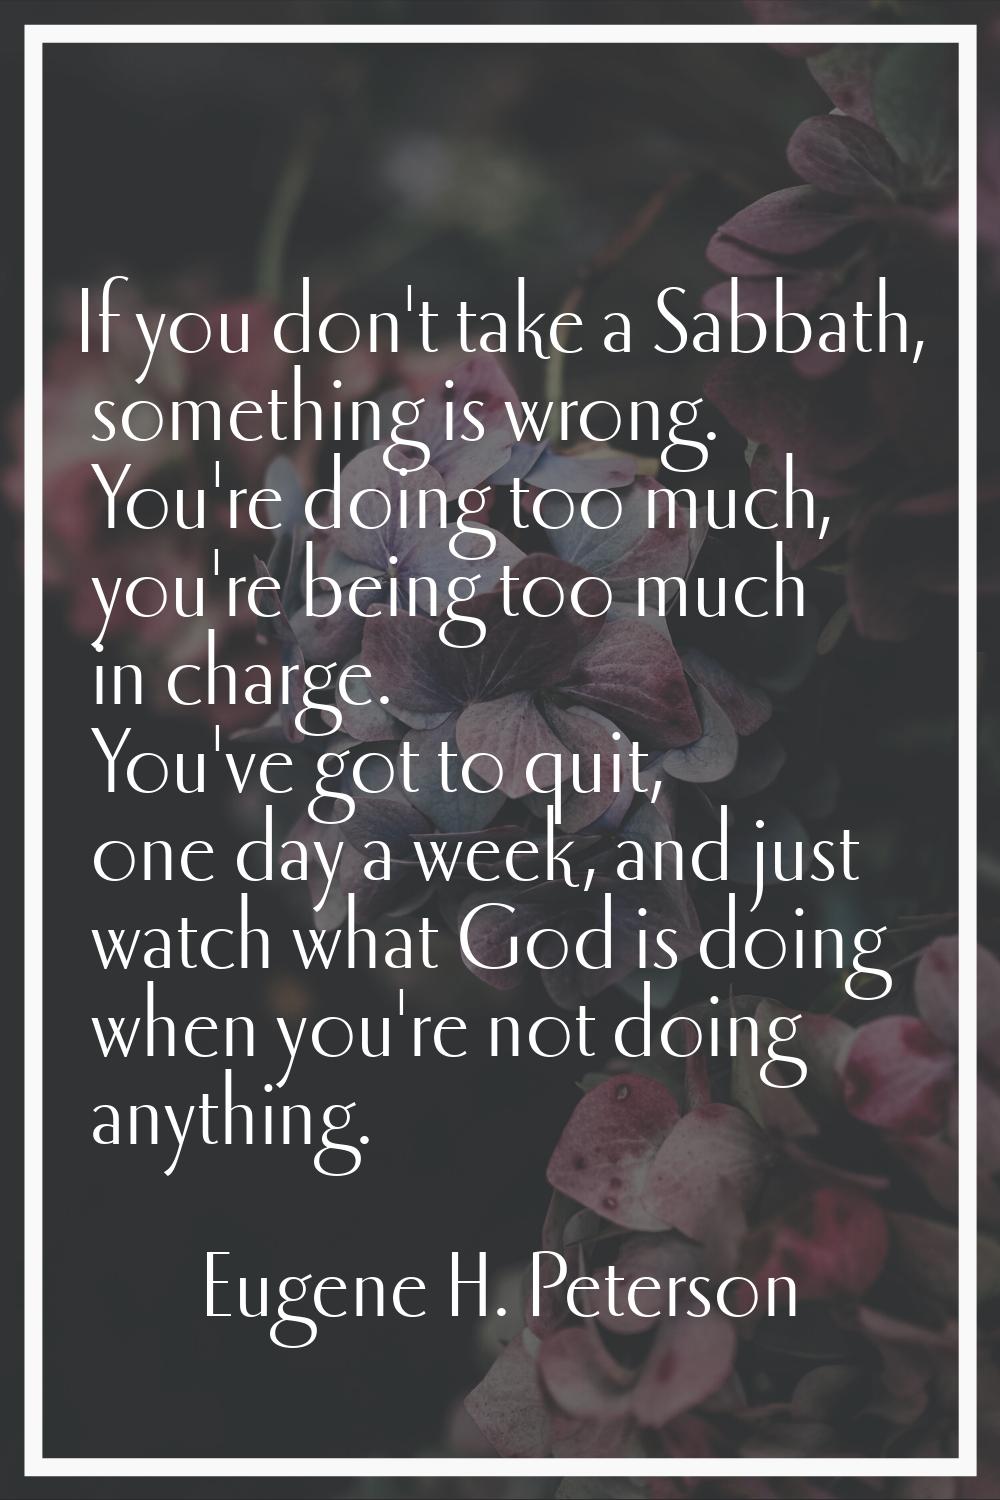 If you don't take a Sabbath, something is wrong. You're doing too much, you're being too much in ch